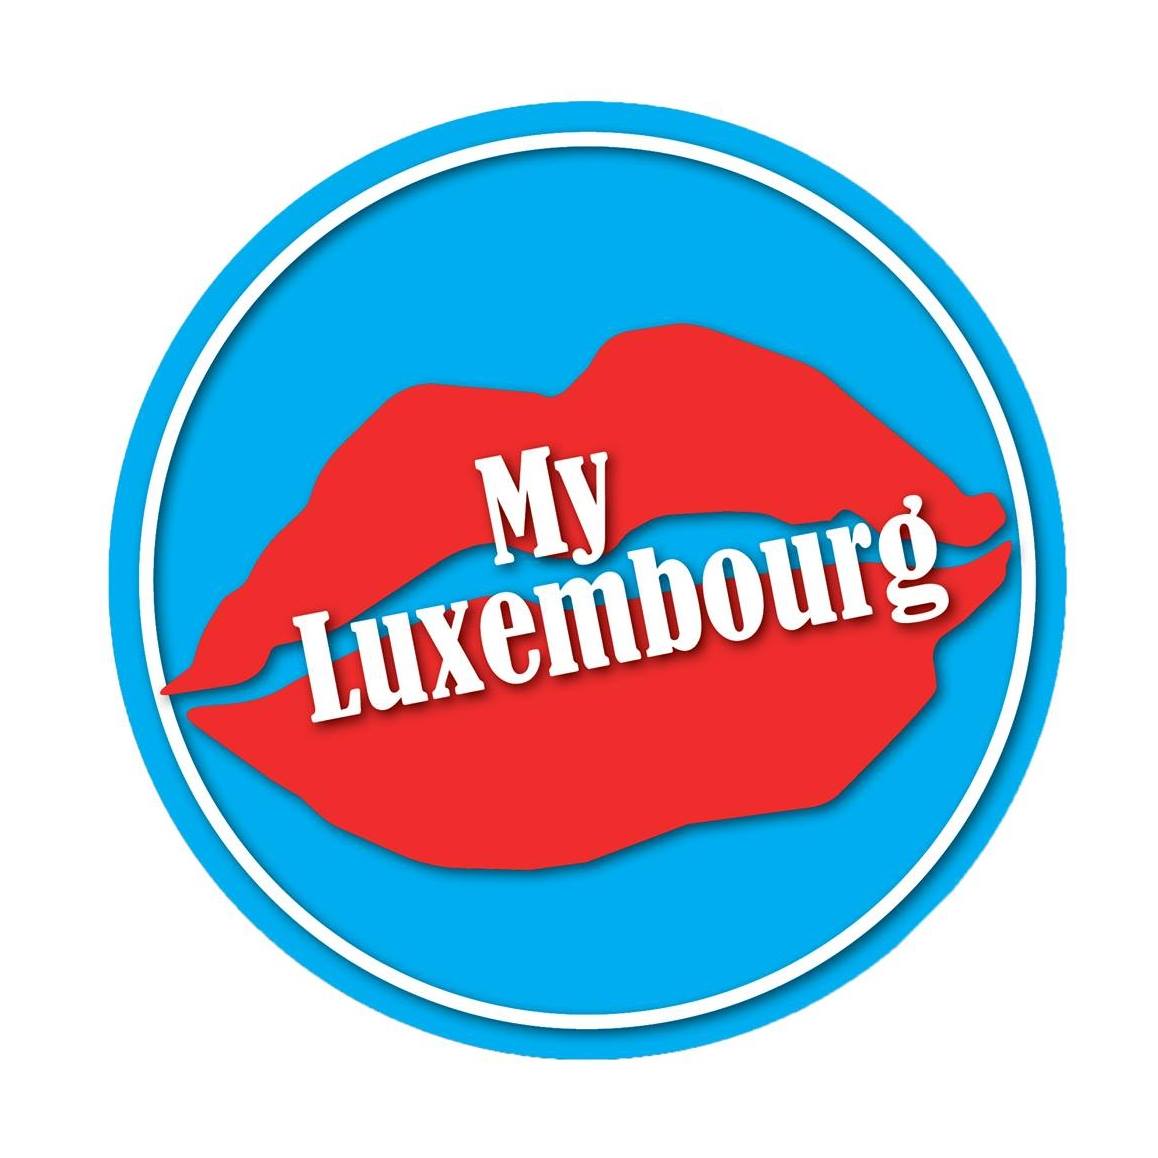 My Luxembourg